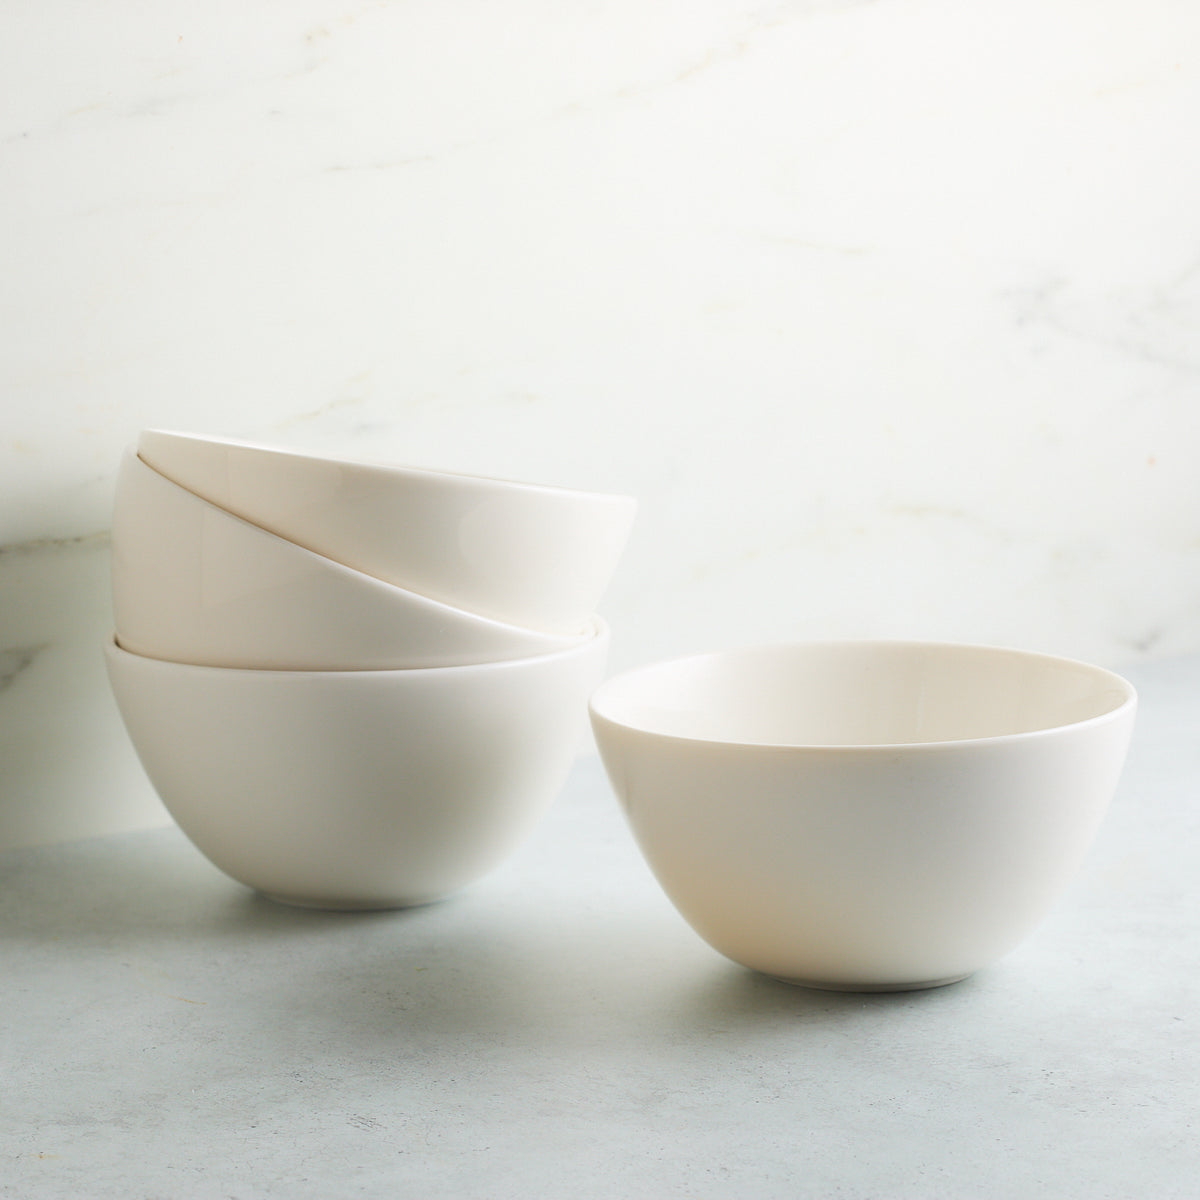 Four sleek white cereal bowls on a gray surface, with three stacked on the left and one separate on the right against a white marble background. The Grace White Cereal Bowl by Caskata Artisanal Home, made of high-fired porcelain, adds elegance to any setting.